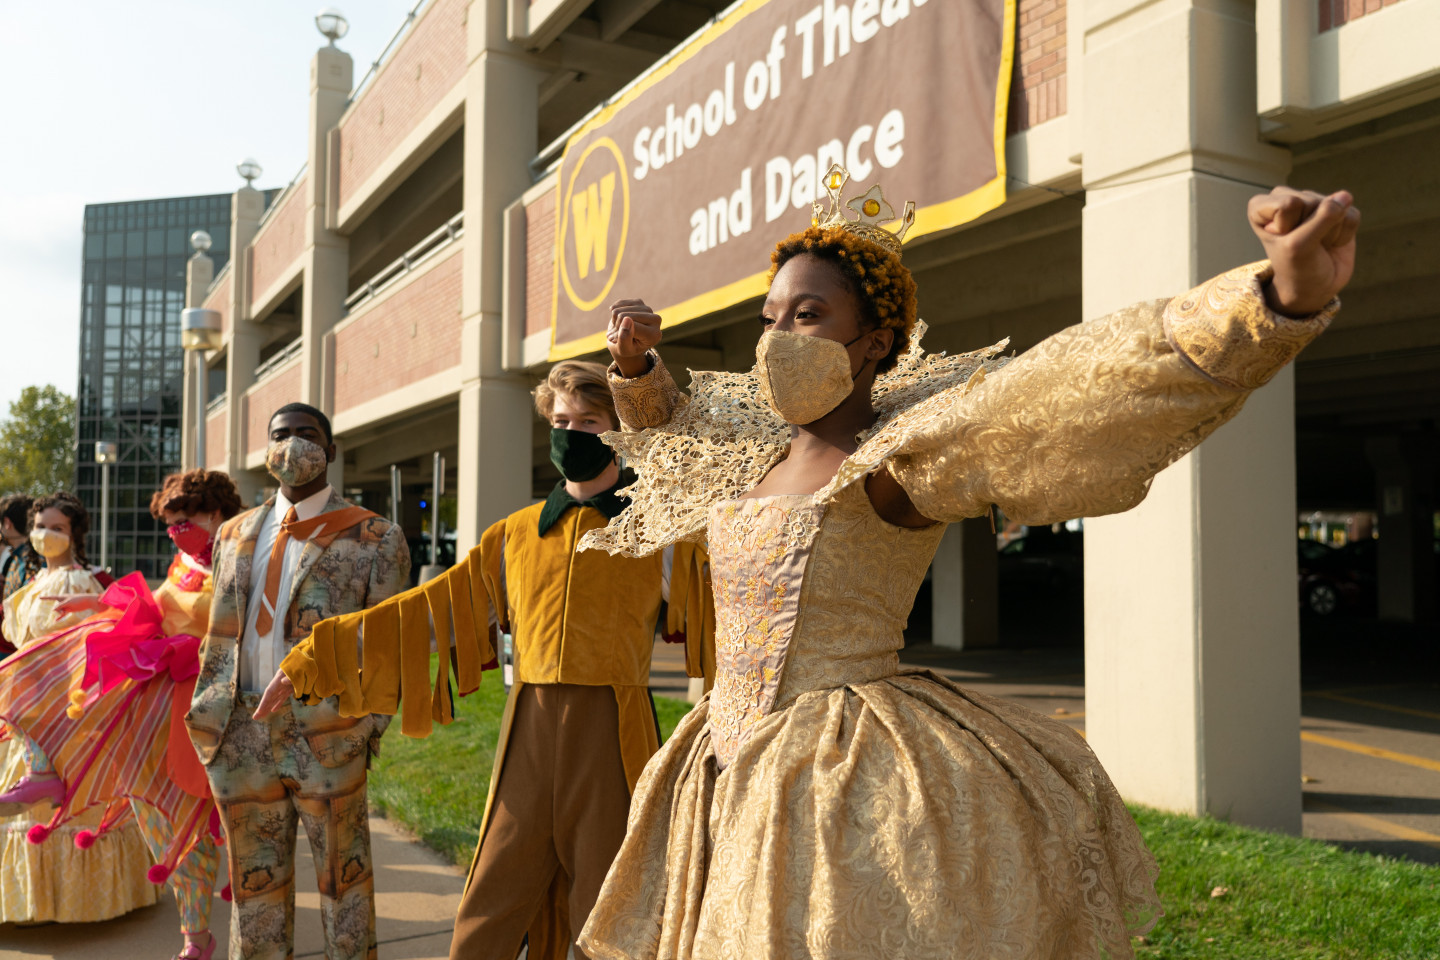 WMU Theatre students in costumes from past shows.